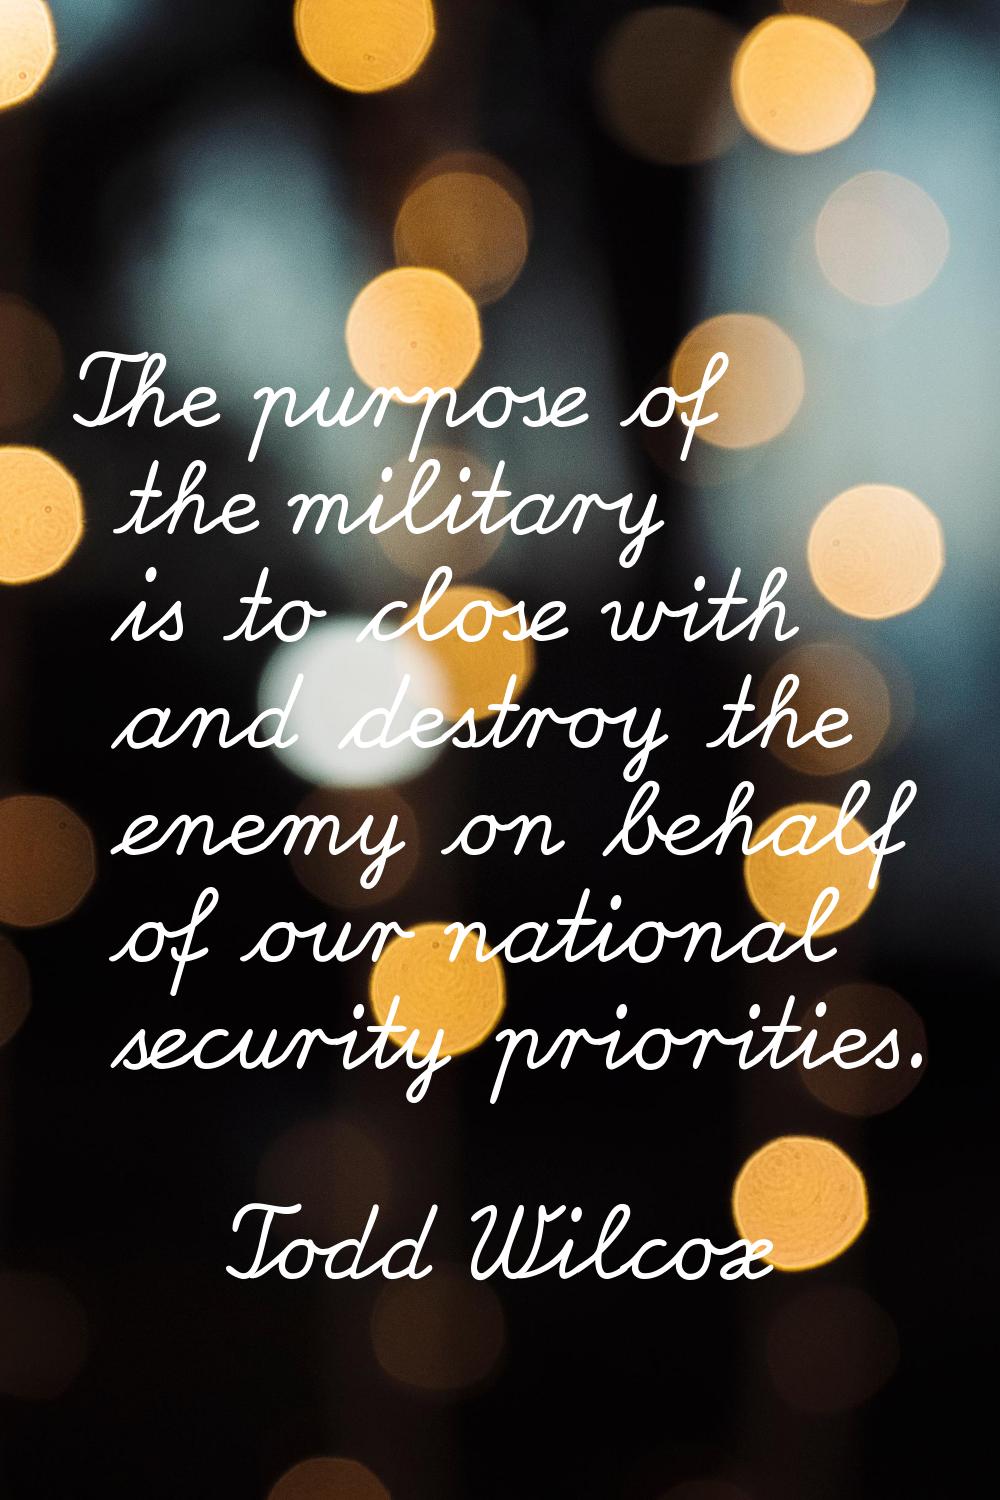 The purpose of the military is to close with and destroy the enemy on behalf of our national securi